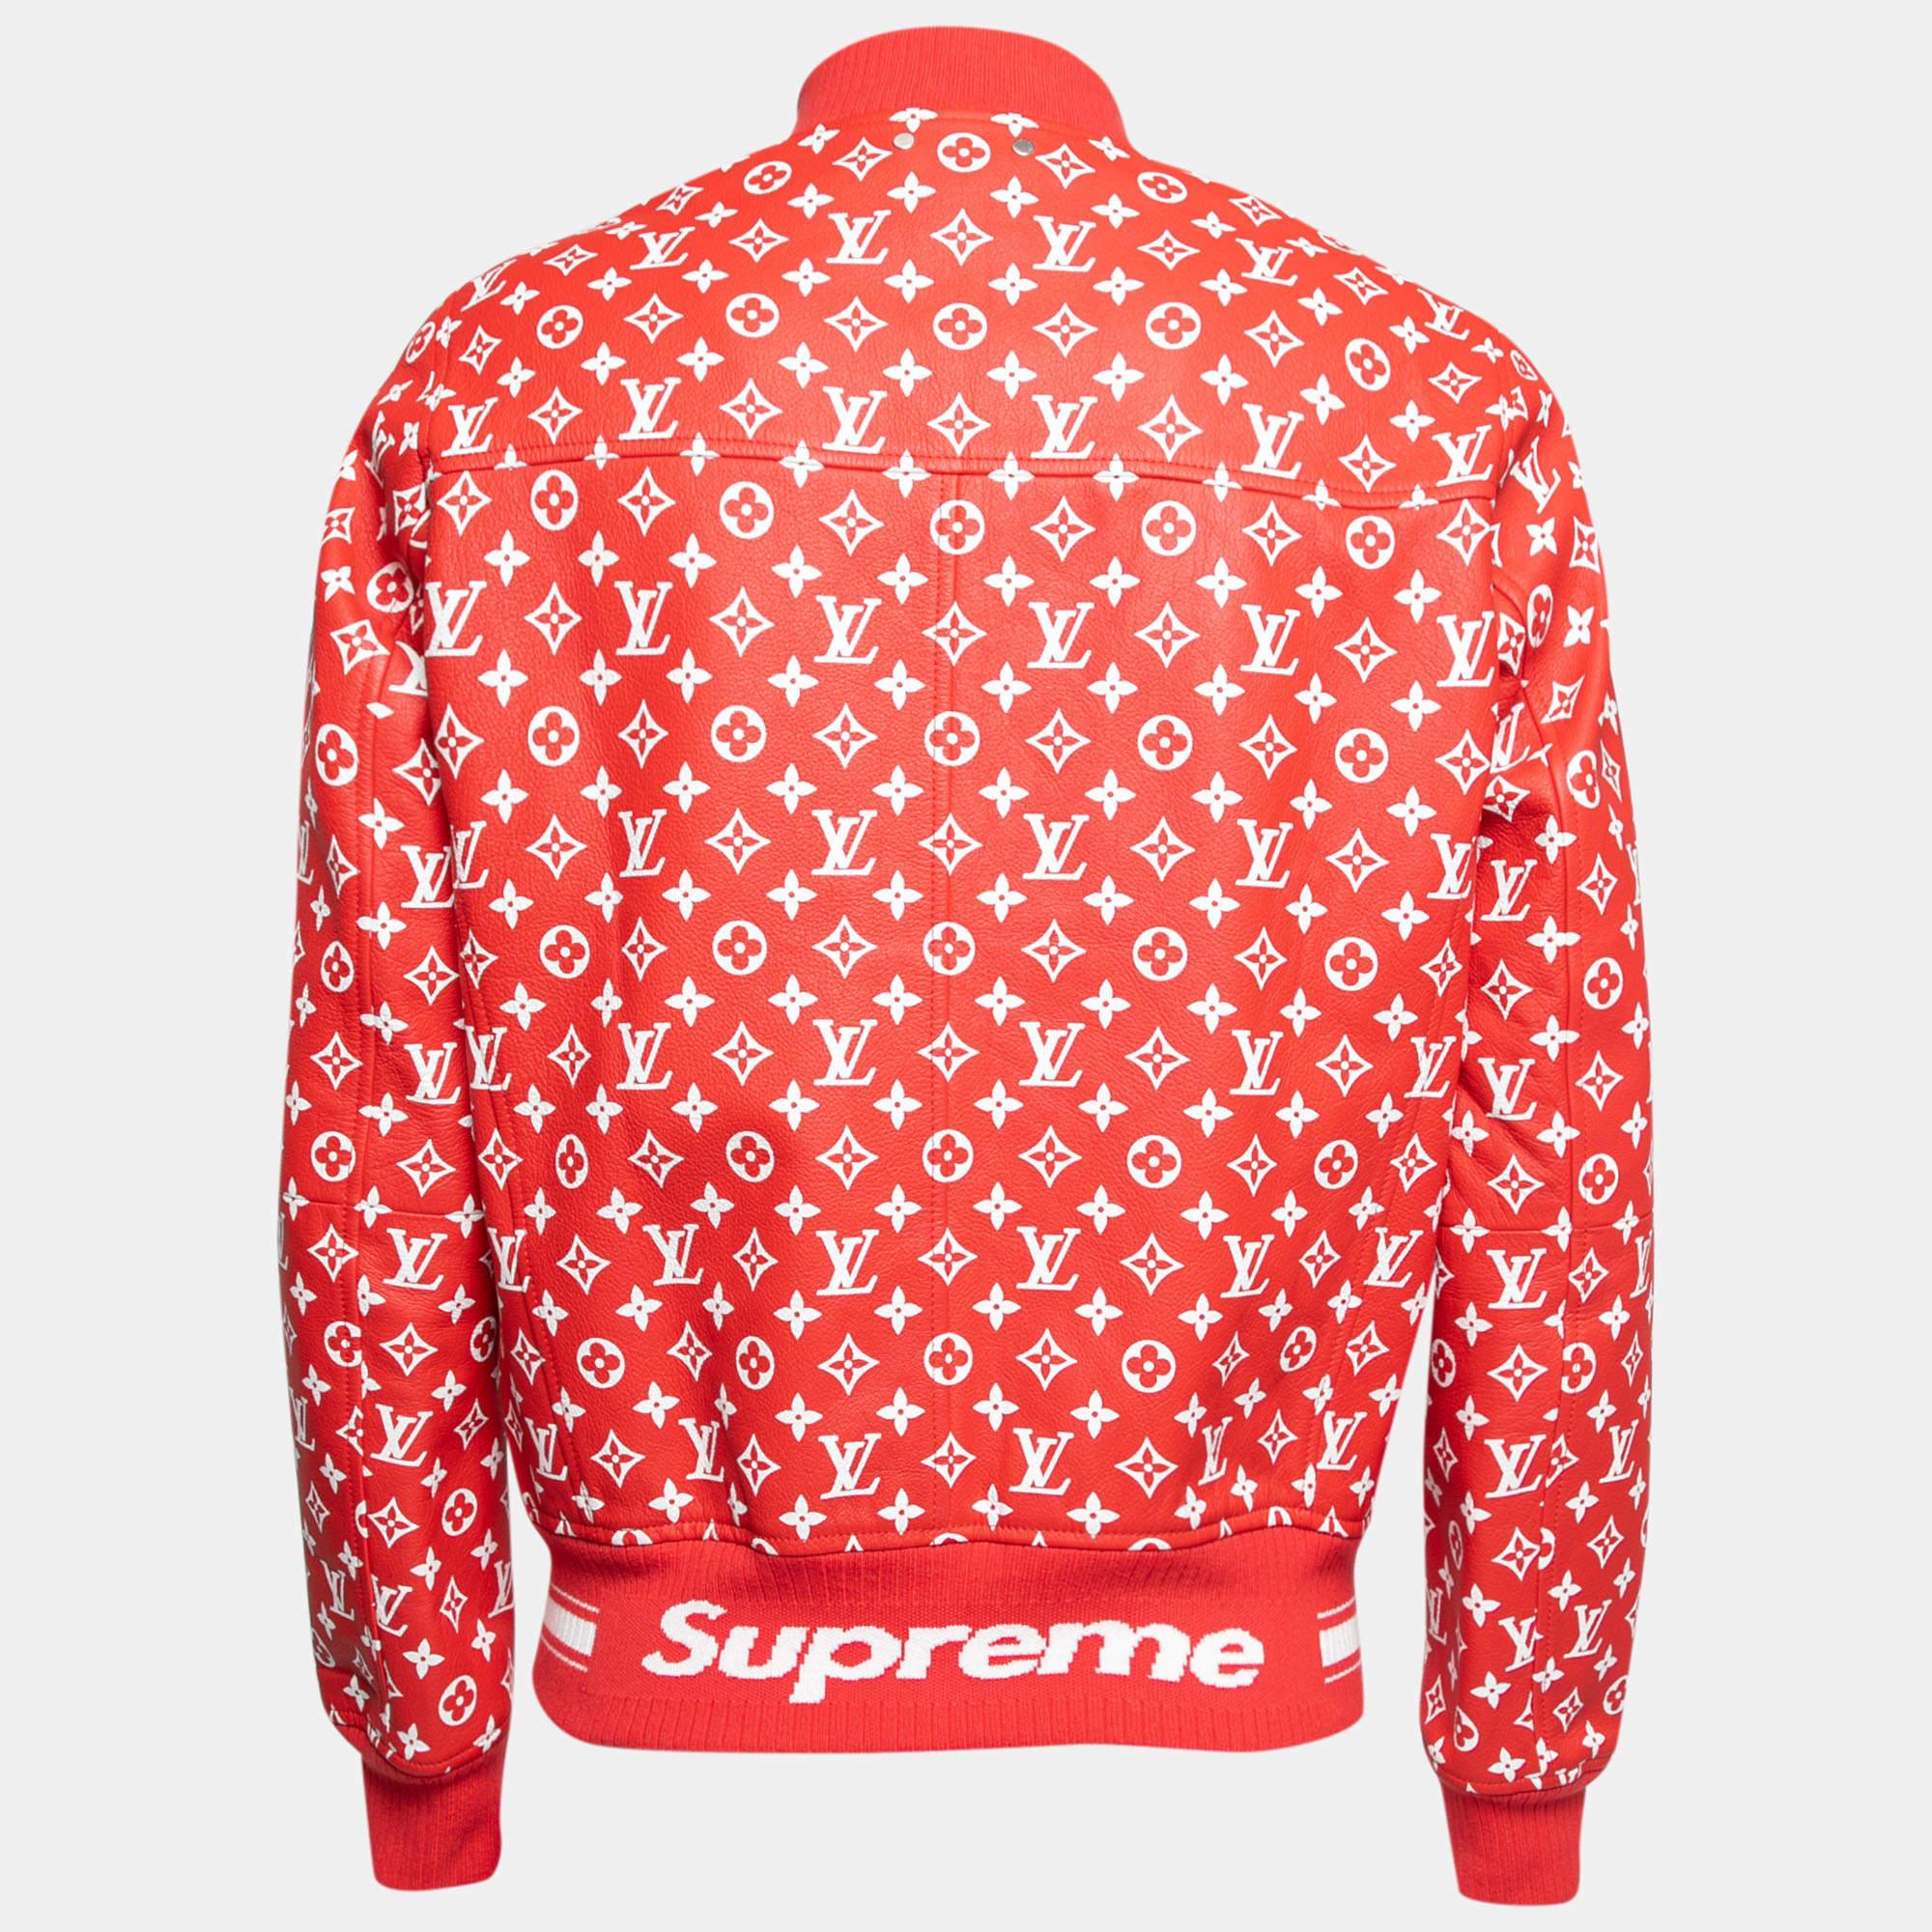 Supreme Louis Vuitton Jacket - 2 For Sale on 1stDibs